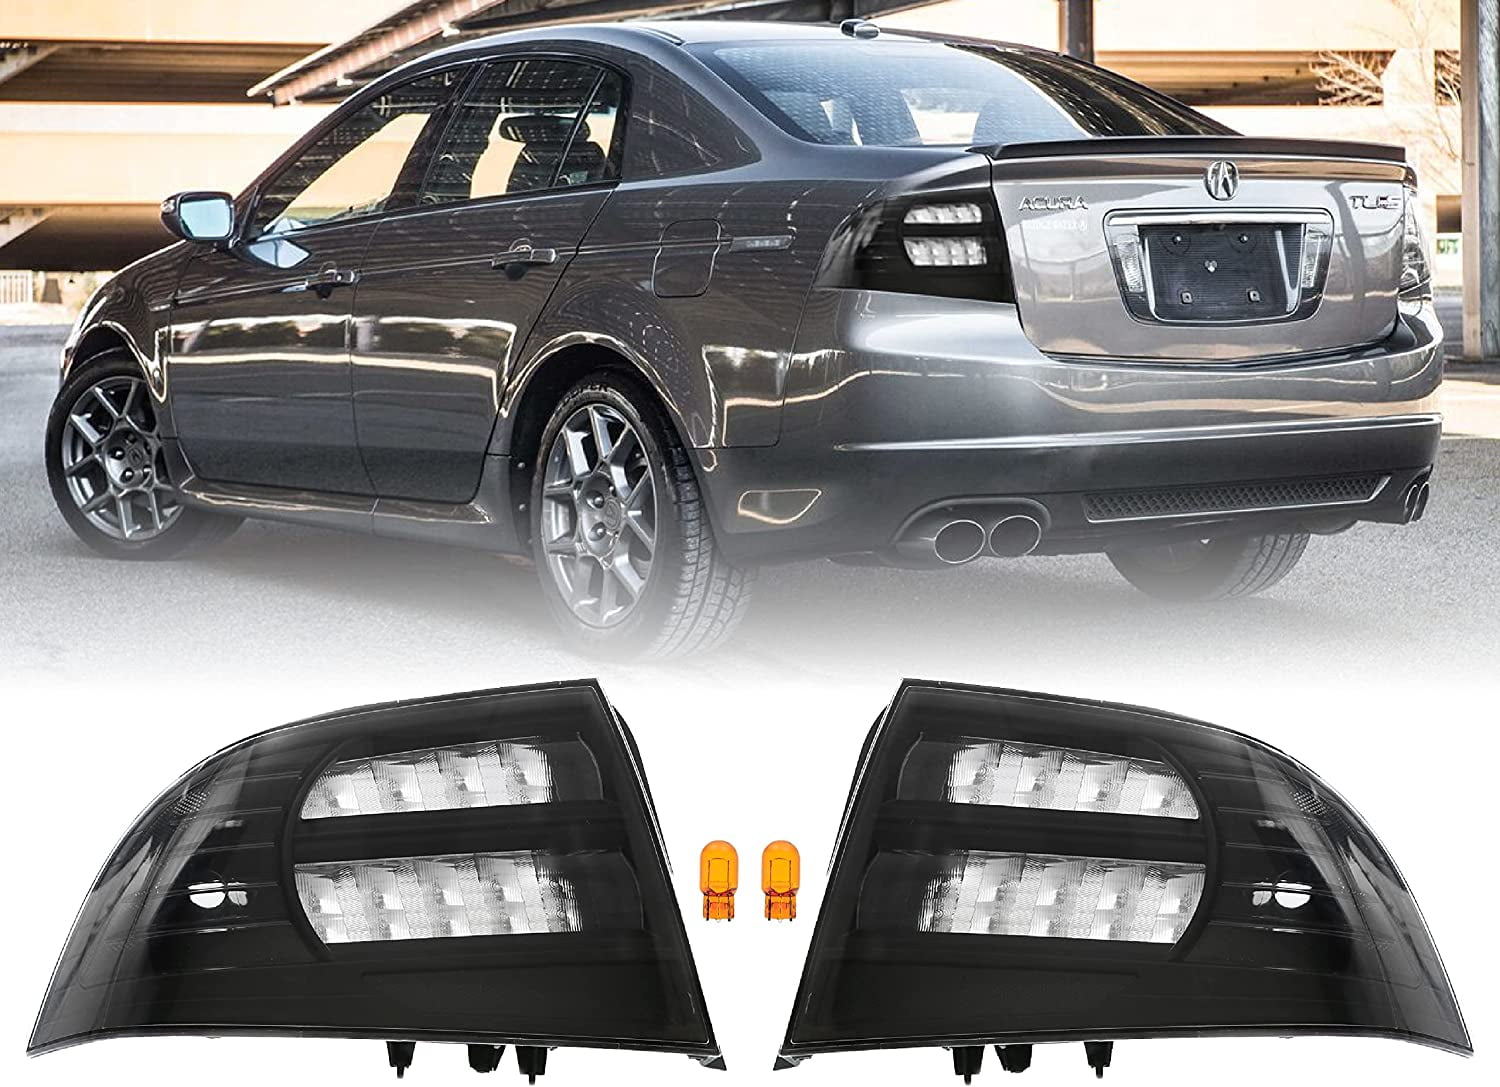 USR DEPO 3G TL Tail Lights - JDM Style Black Housing Rear Tail Lamps Cover  (Left + Right) Compatible with 2004-2008 Acura TL All Models including Base 